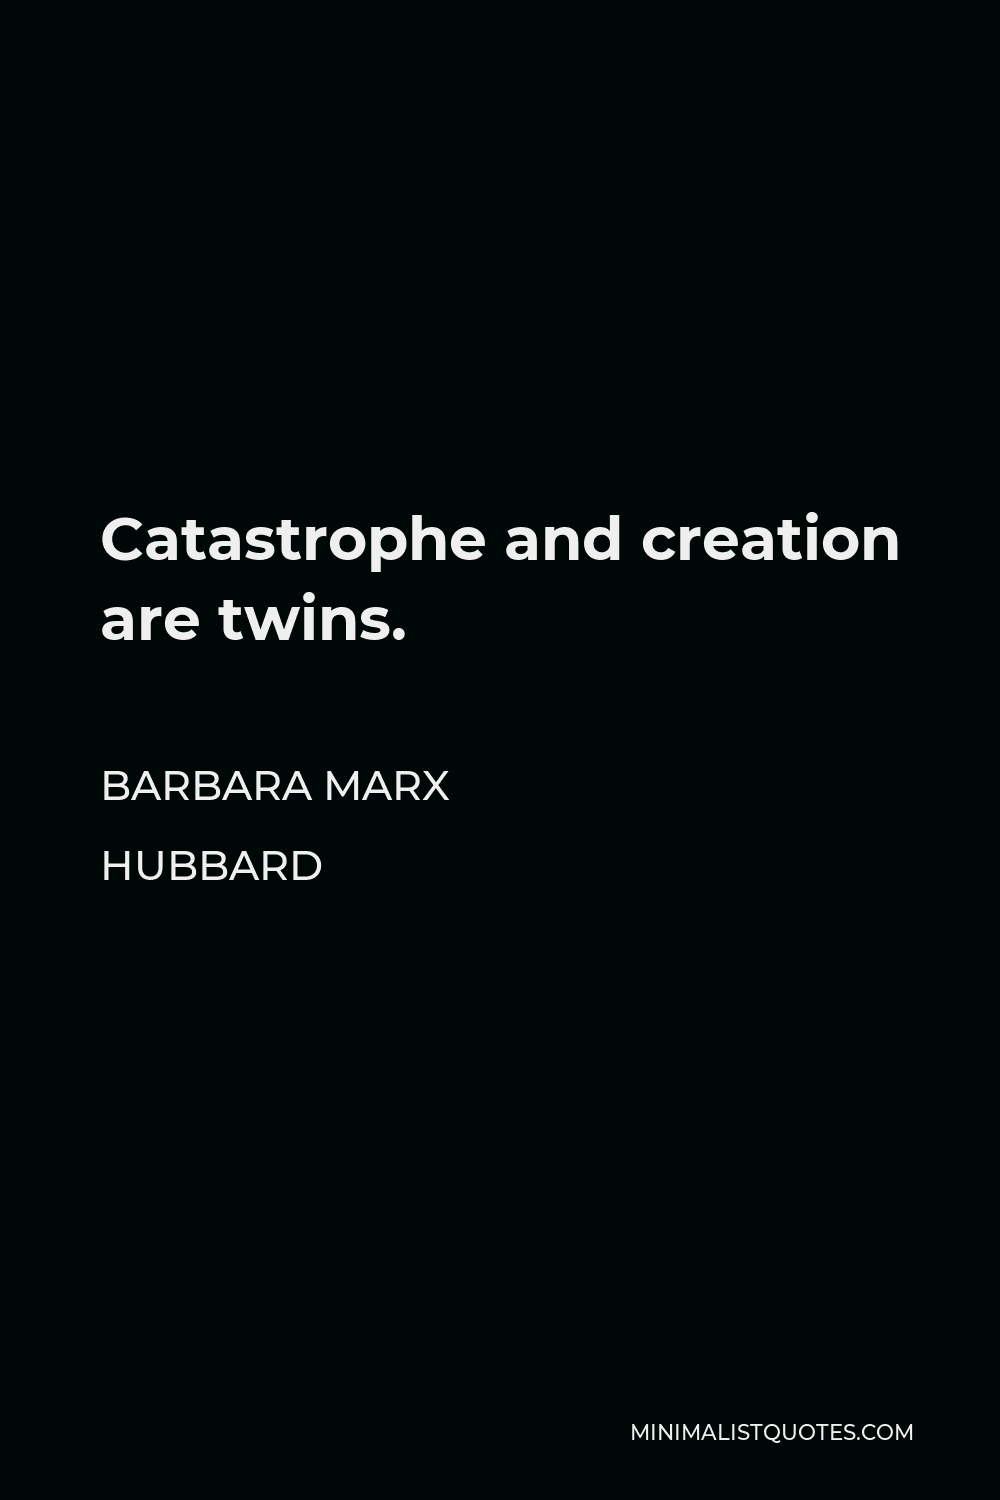 Barbara Marx Hubbard Quote - Catastrophe and creation are twins.